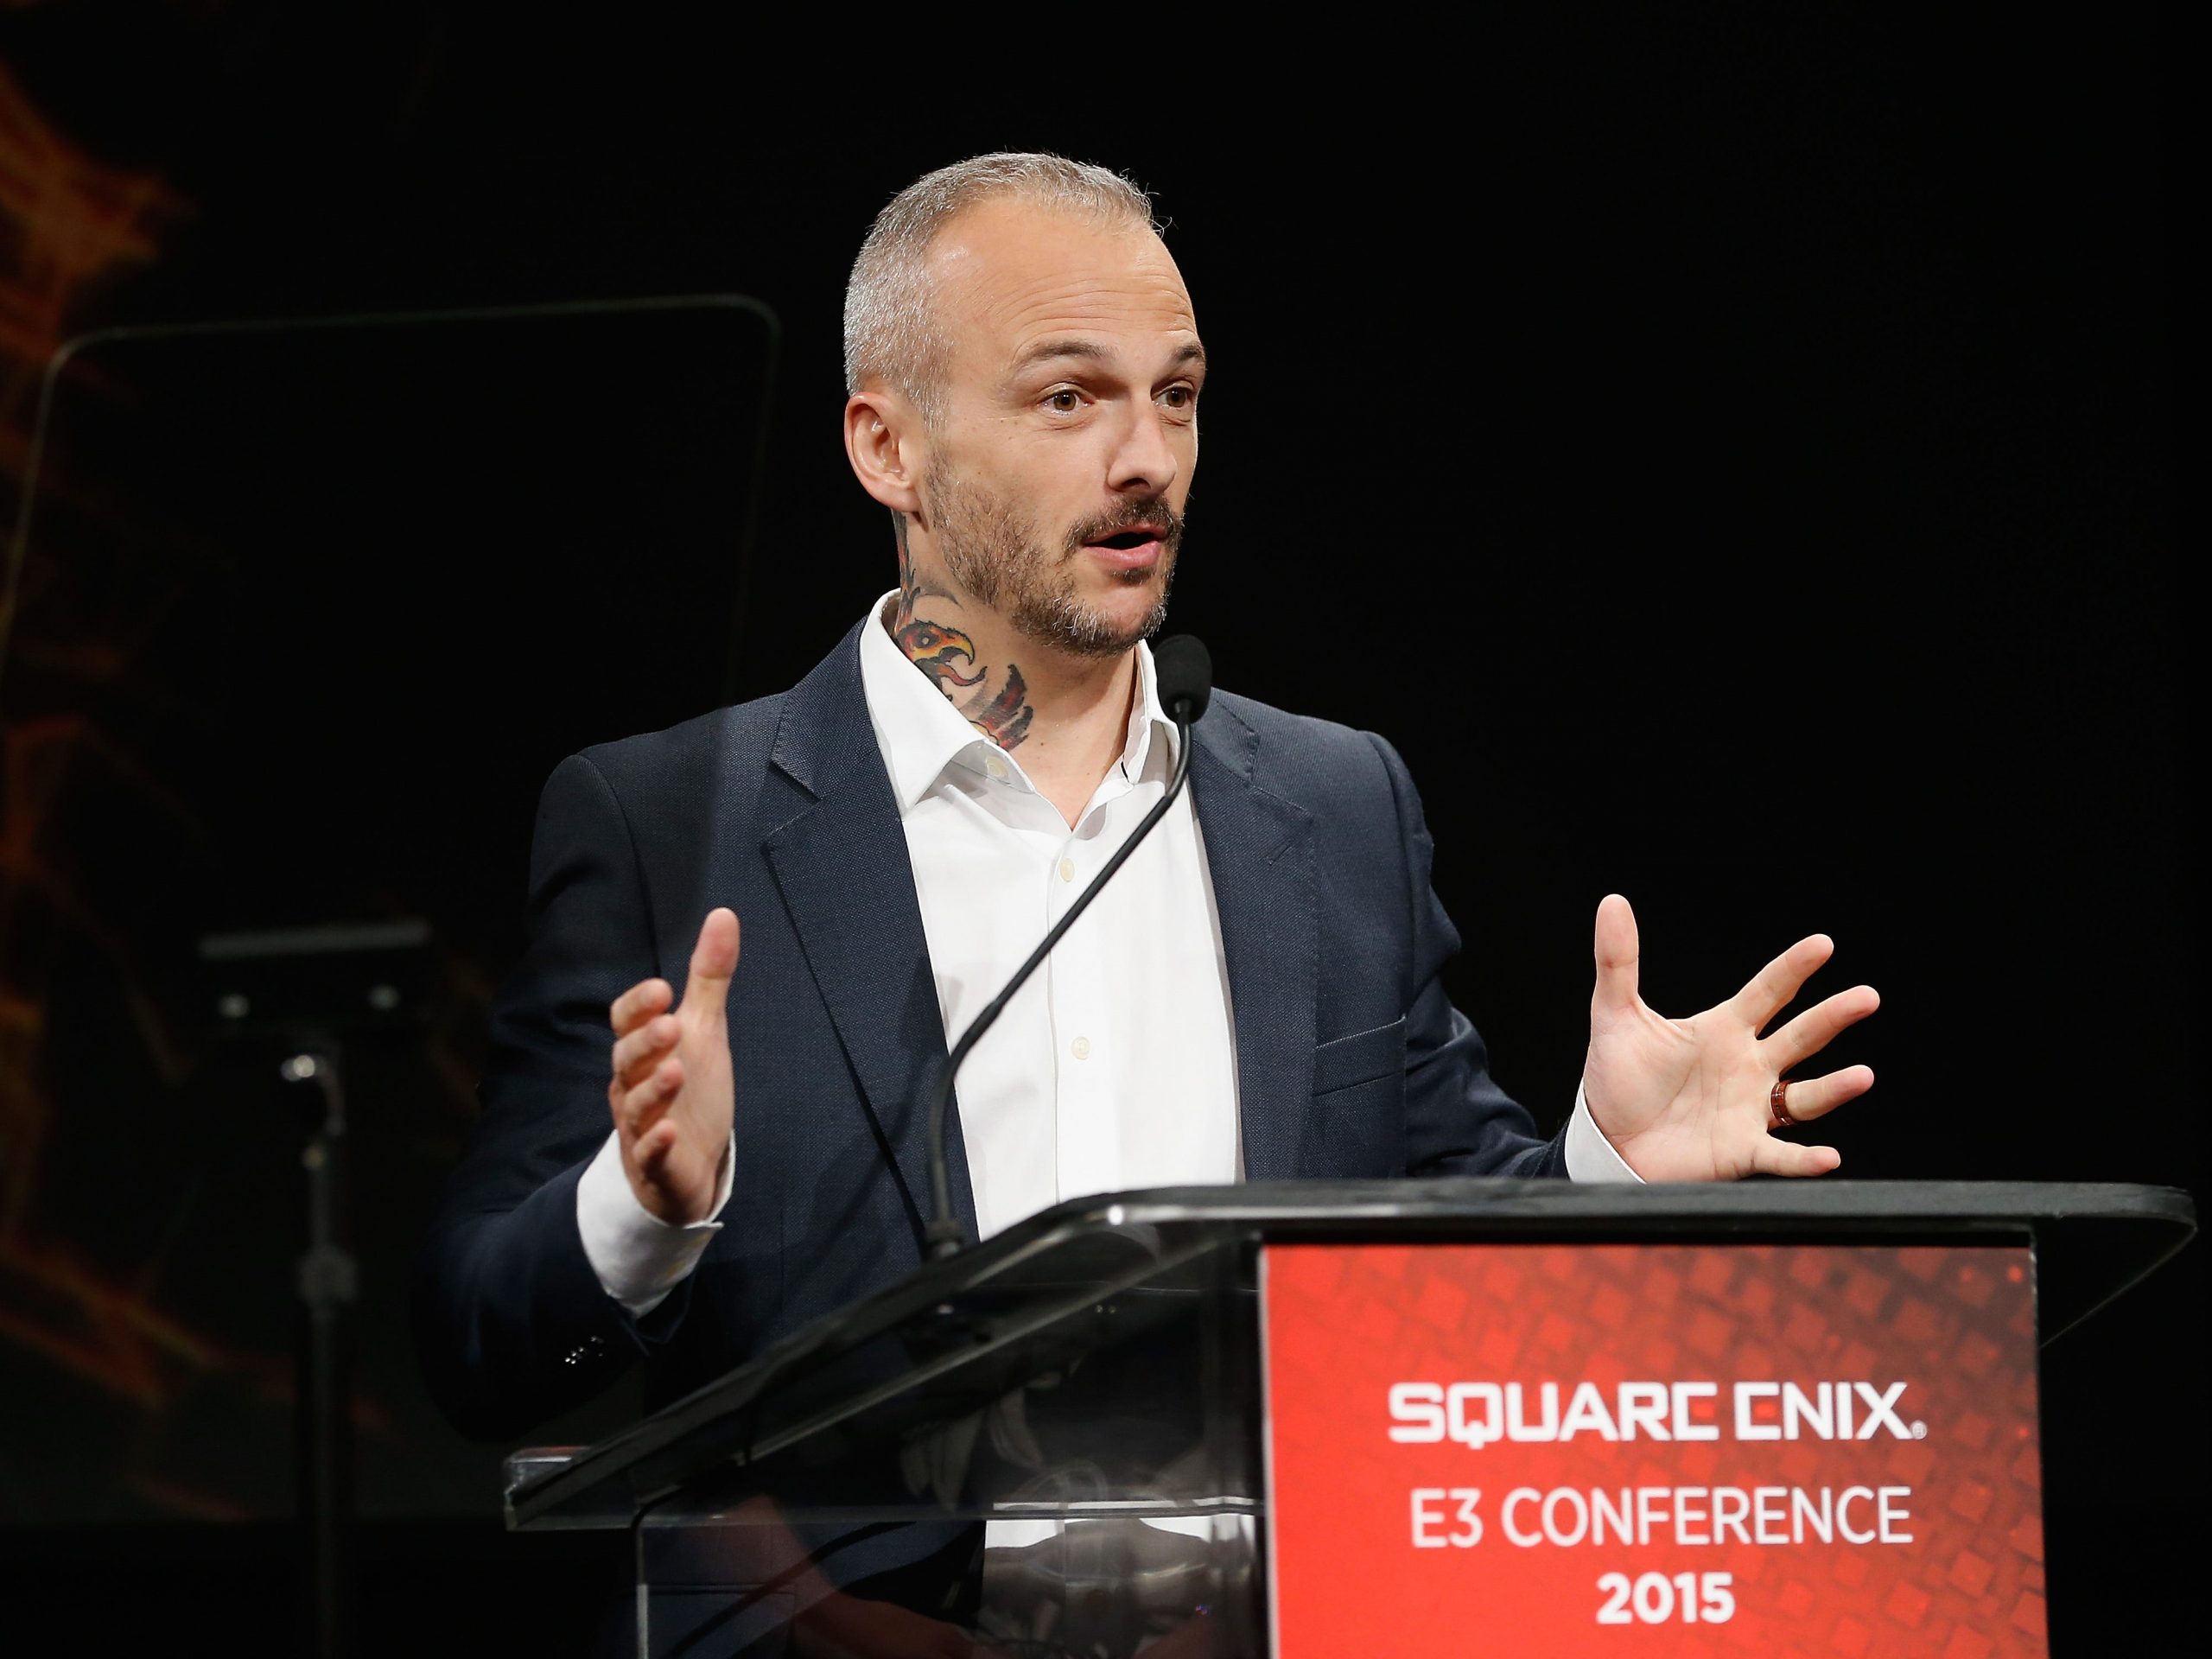 Head of Studio at Eidos Montreal, David Anfossi speaks during the Square Enix press conference at the JW Marriott on June 16, 2015 in Los Angeles, California.